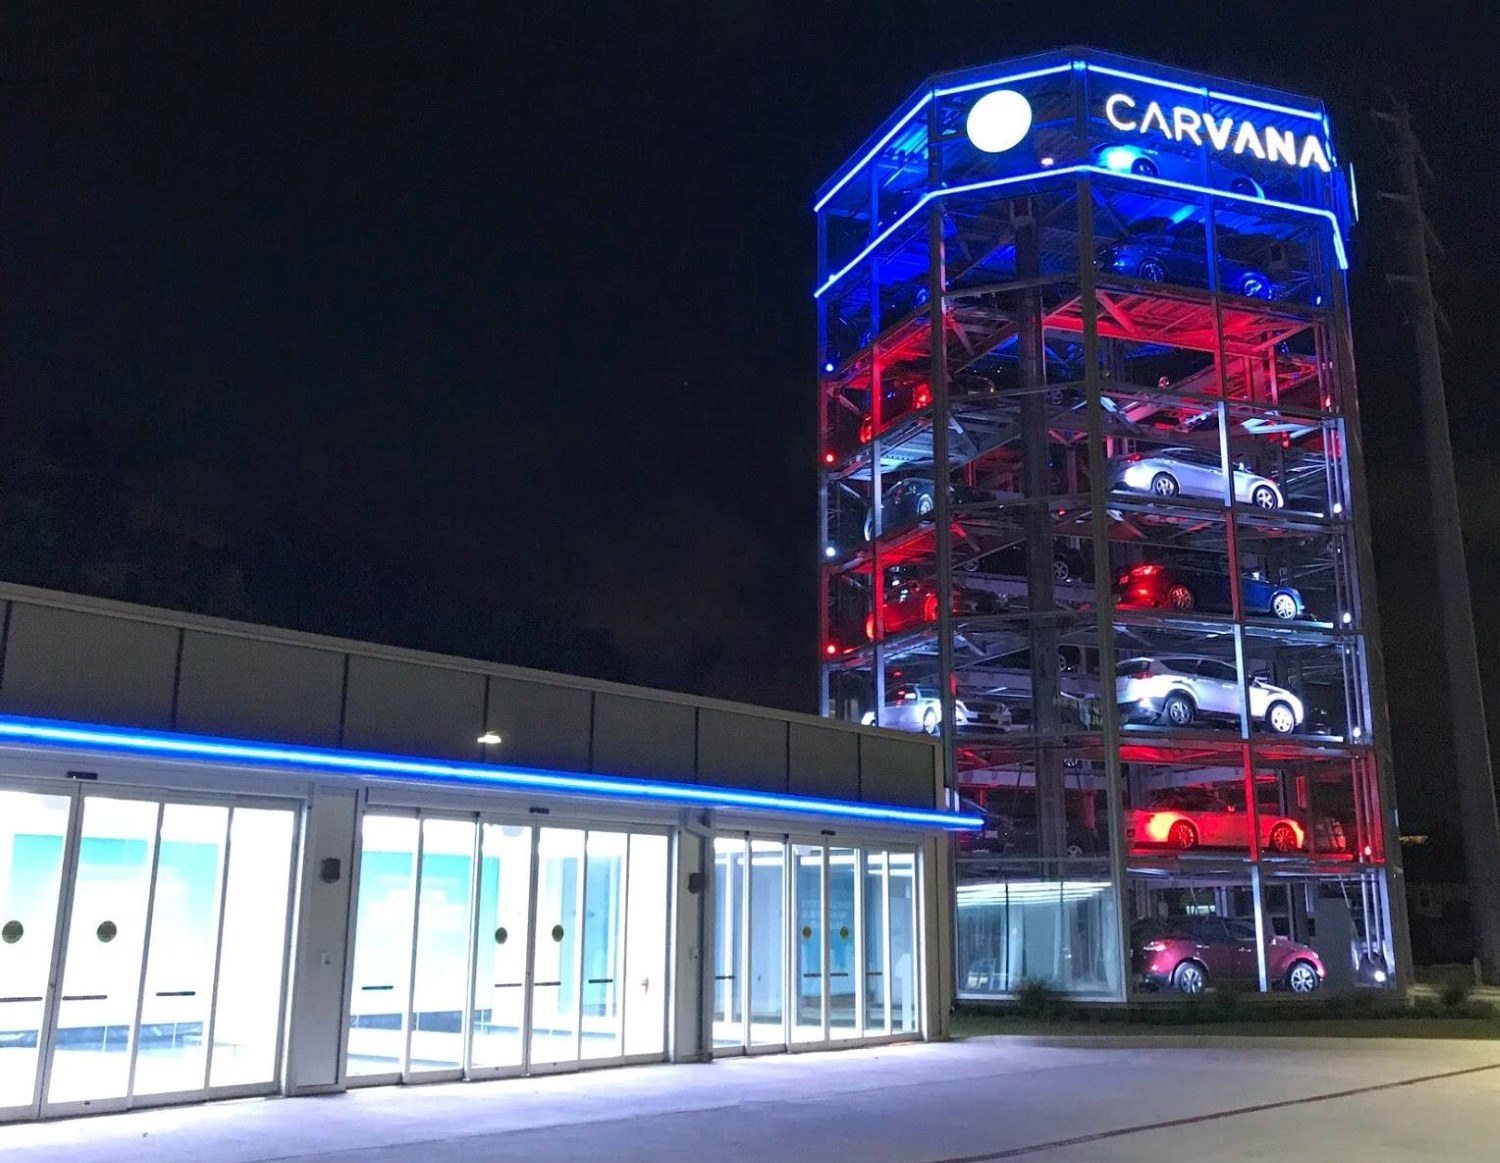 Carvana location with empty store